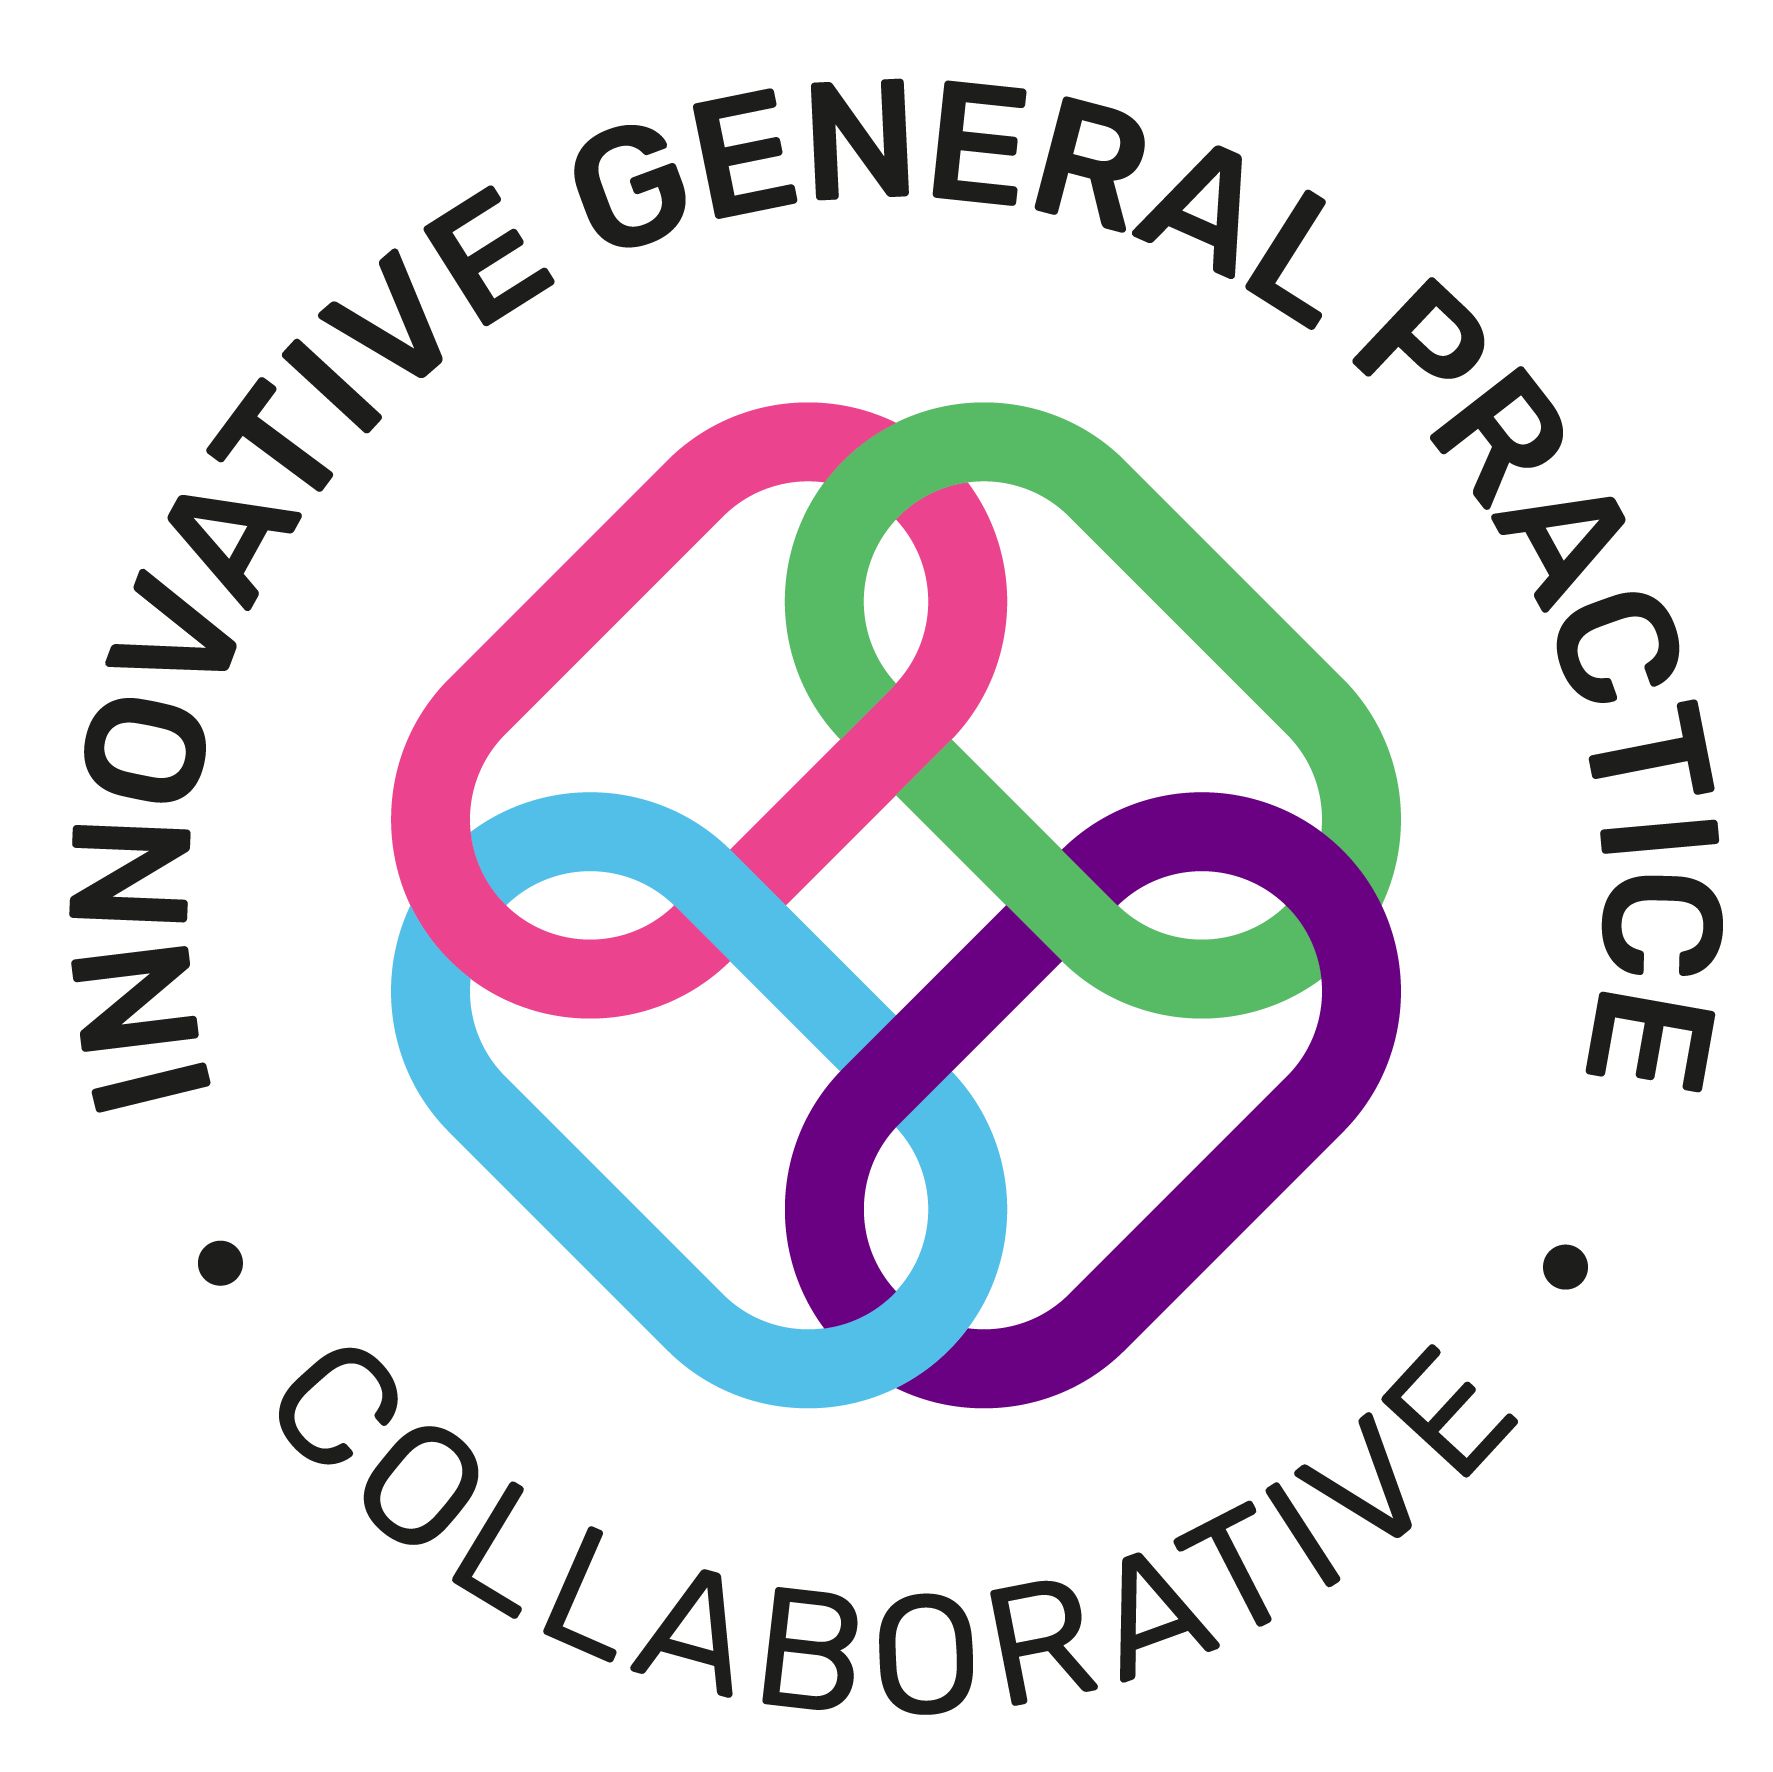 The logo for Innovative General Practice collaborative (iGPc)